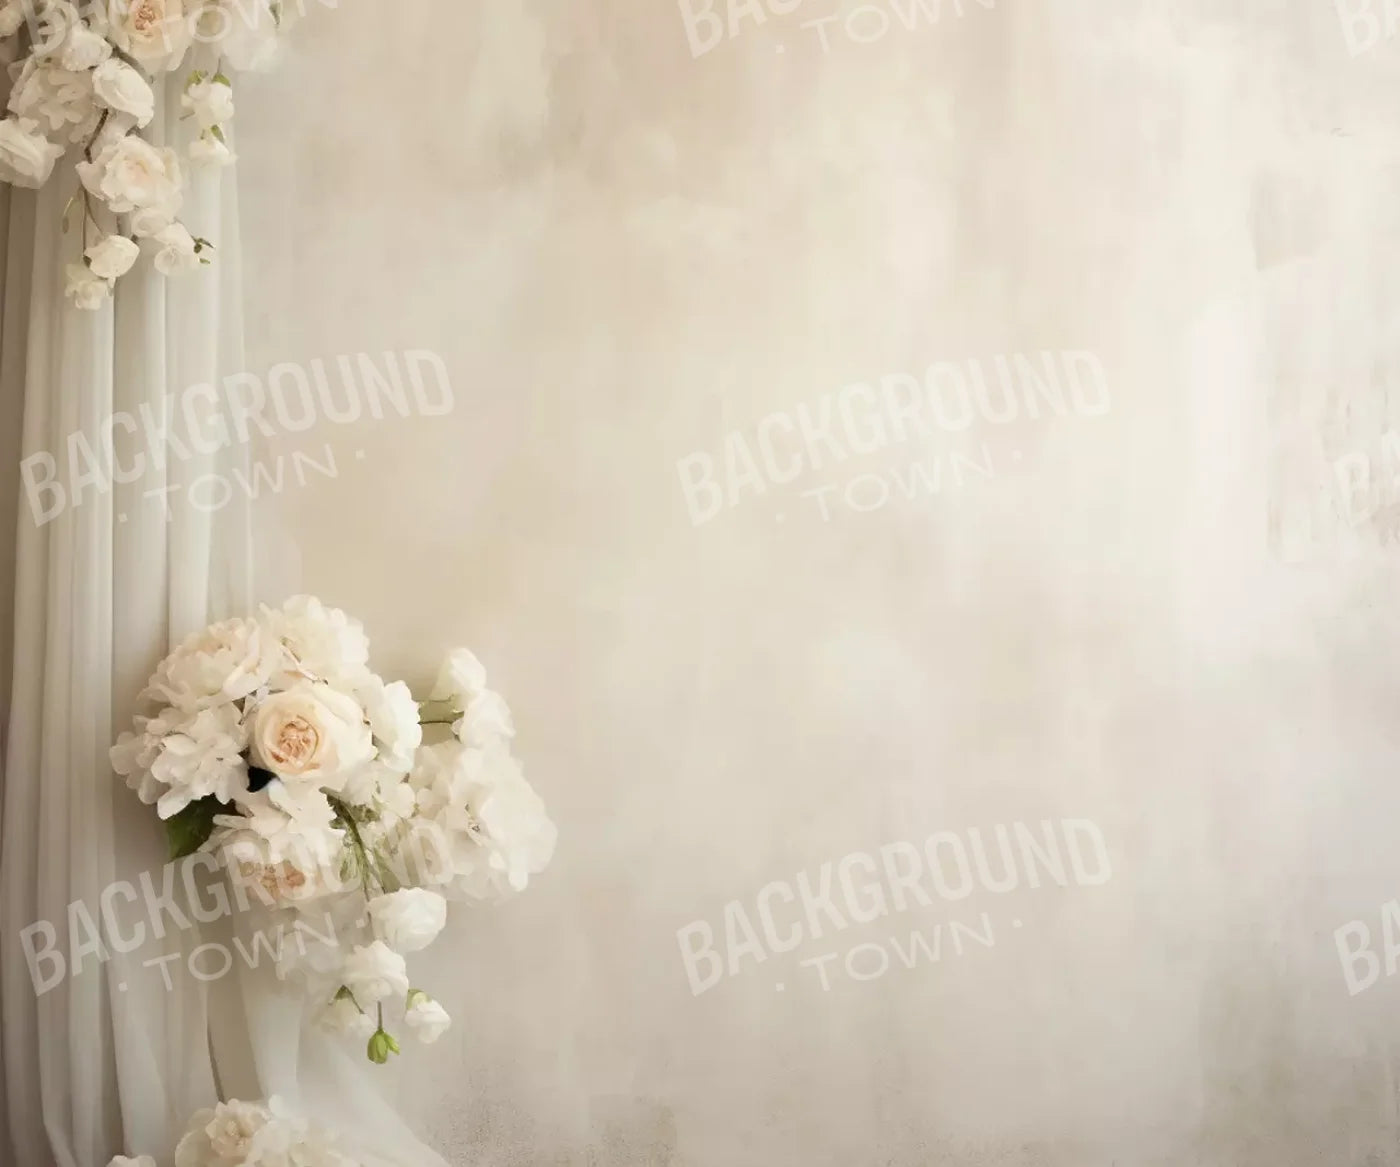 Plaster Wall With Florals 5’X4’2 Fleece (60 X 50 Inch) Backdrop